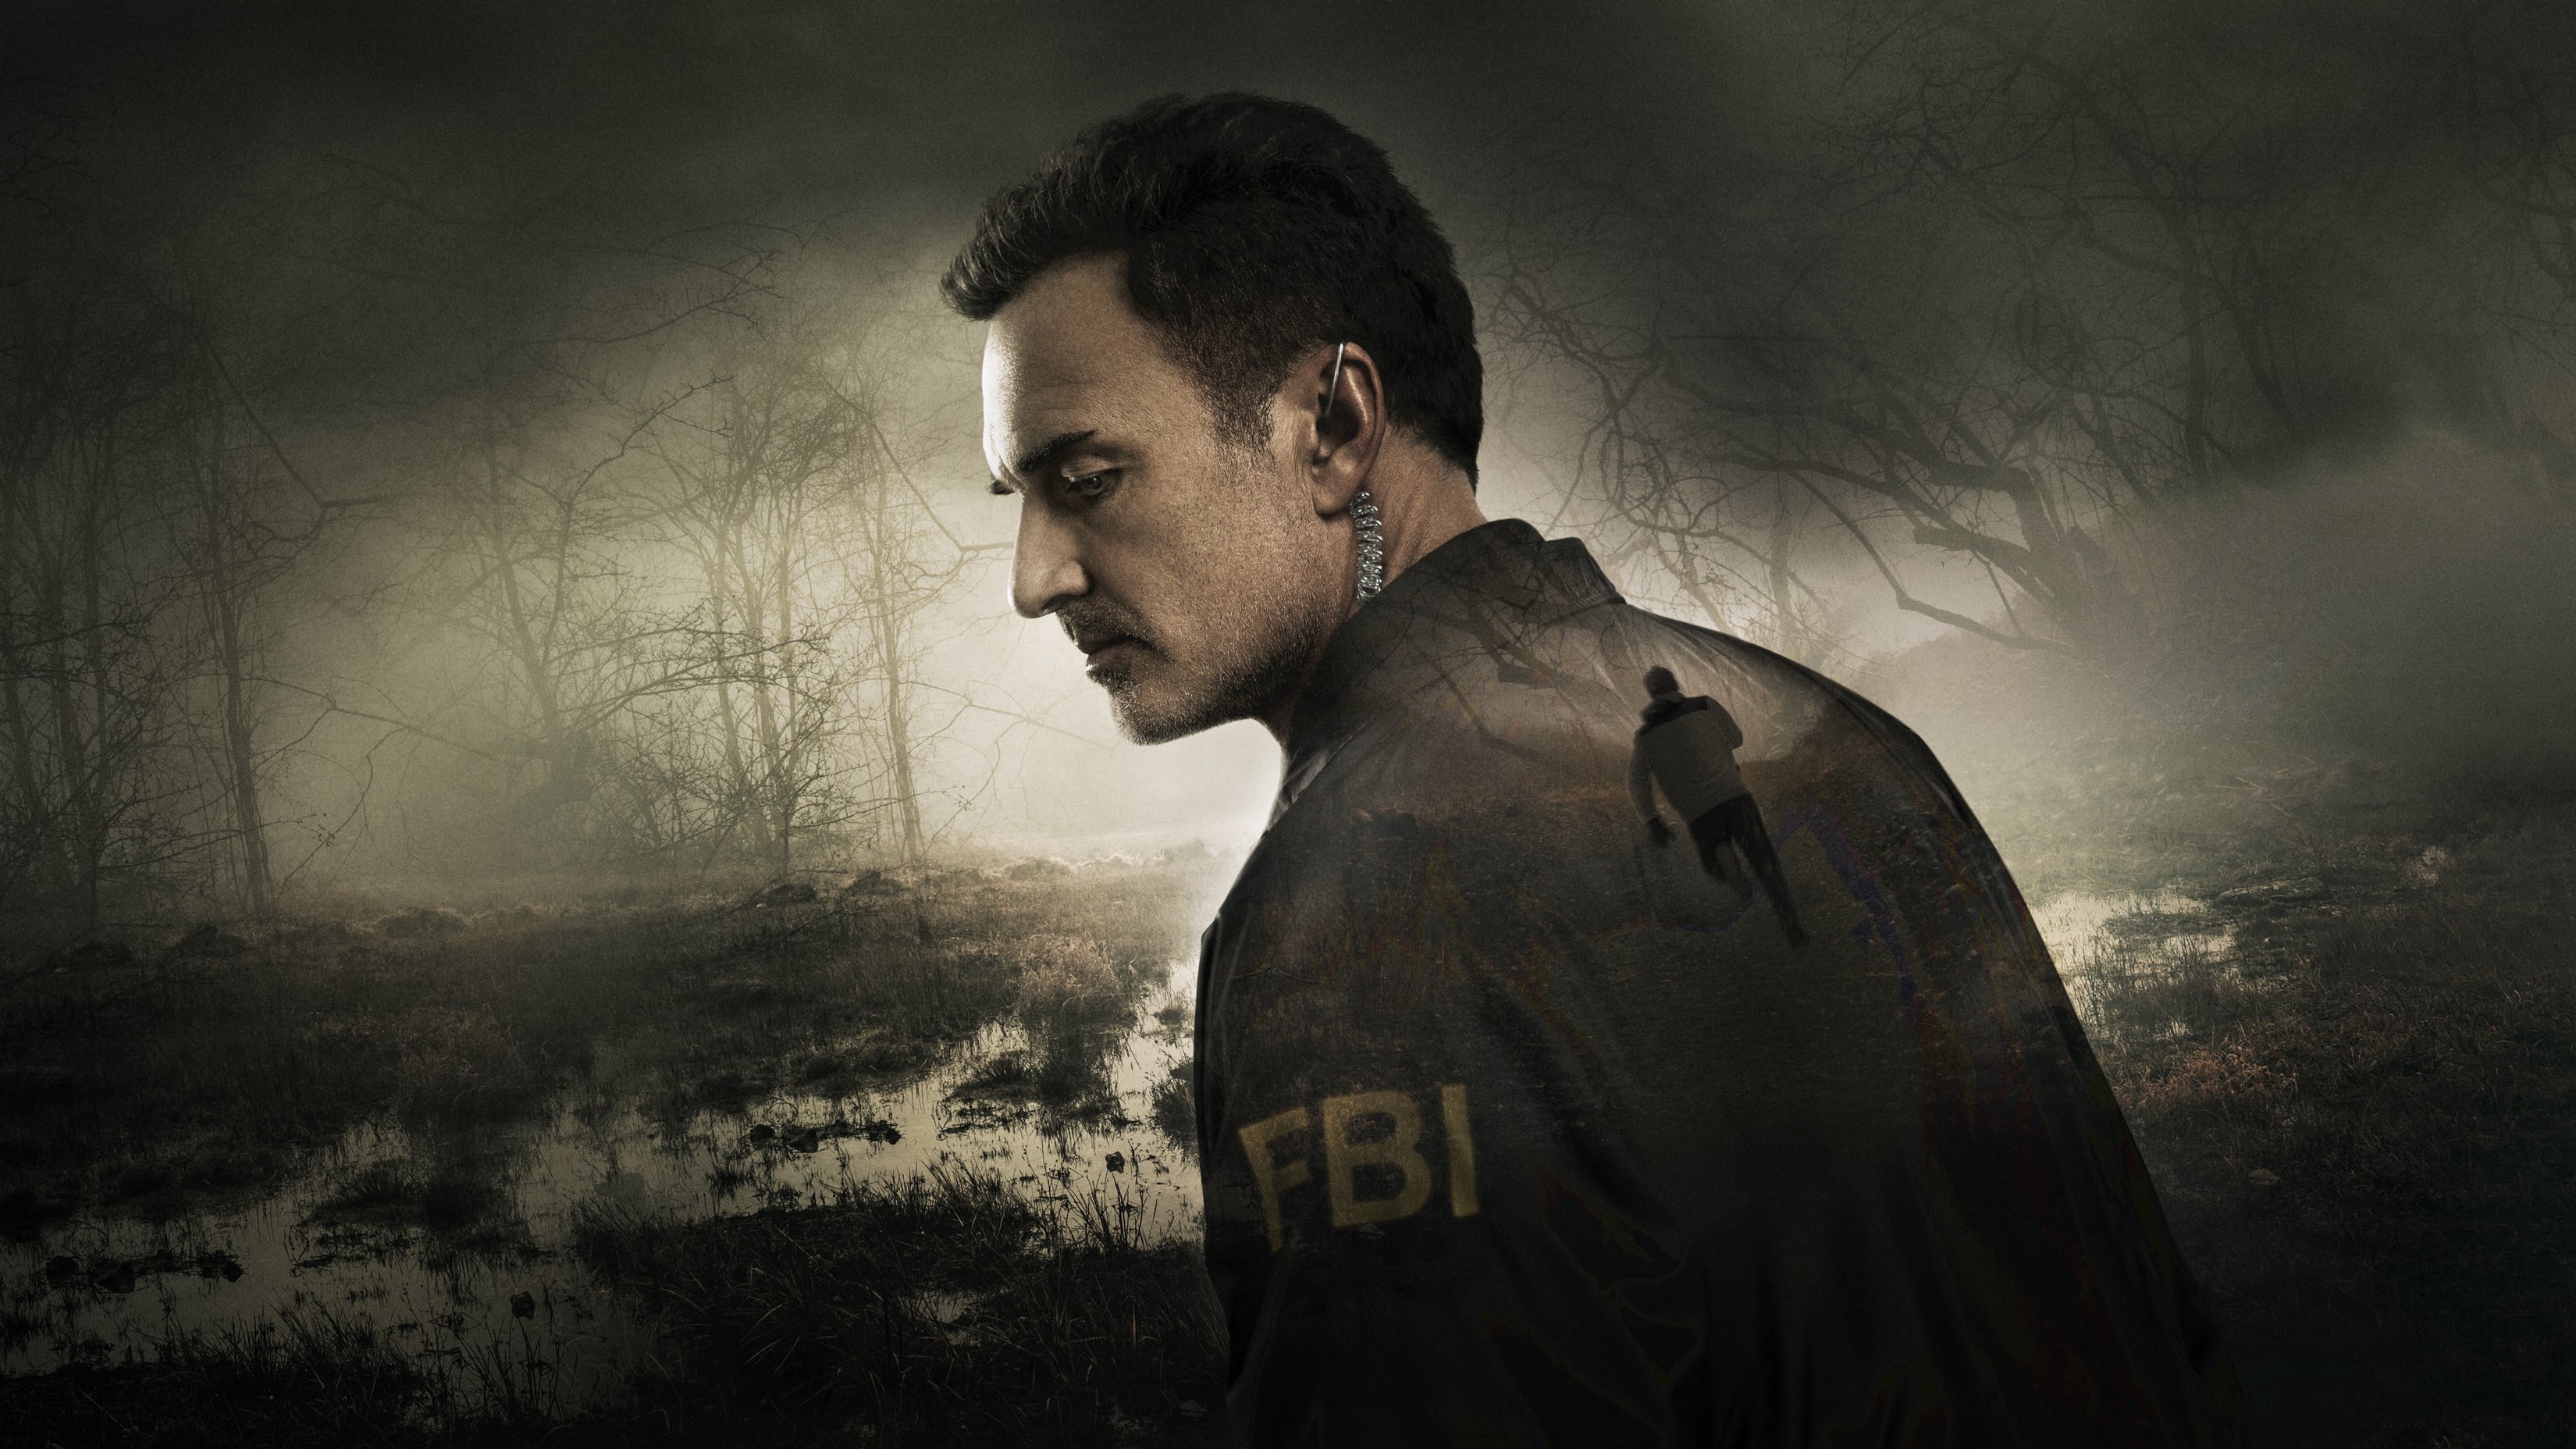 FBI Most Wanted, HD Tv Shows, 4k